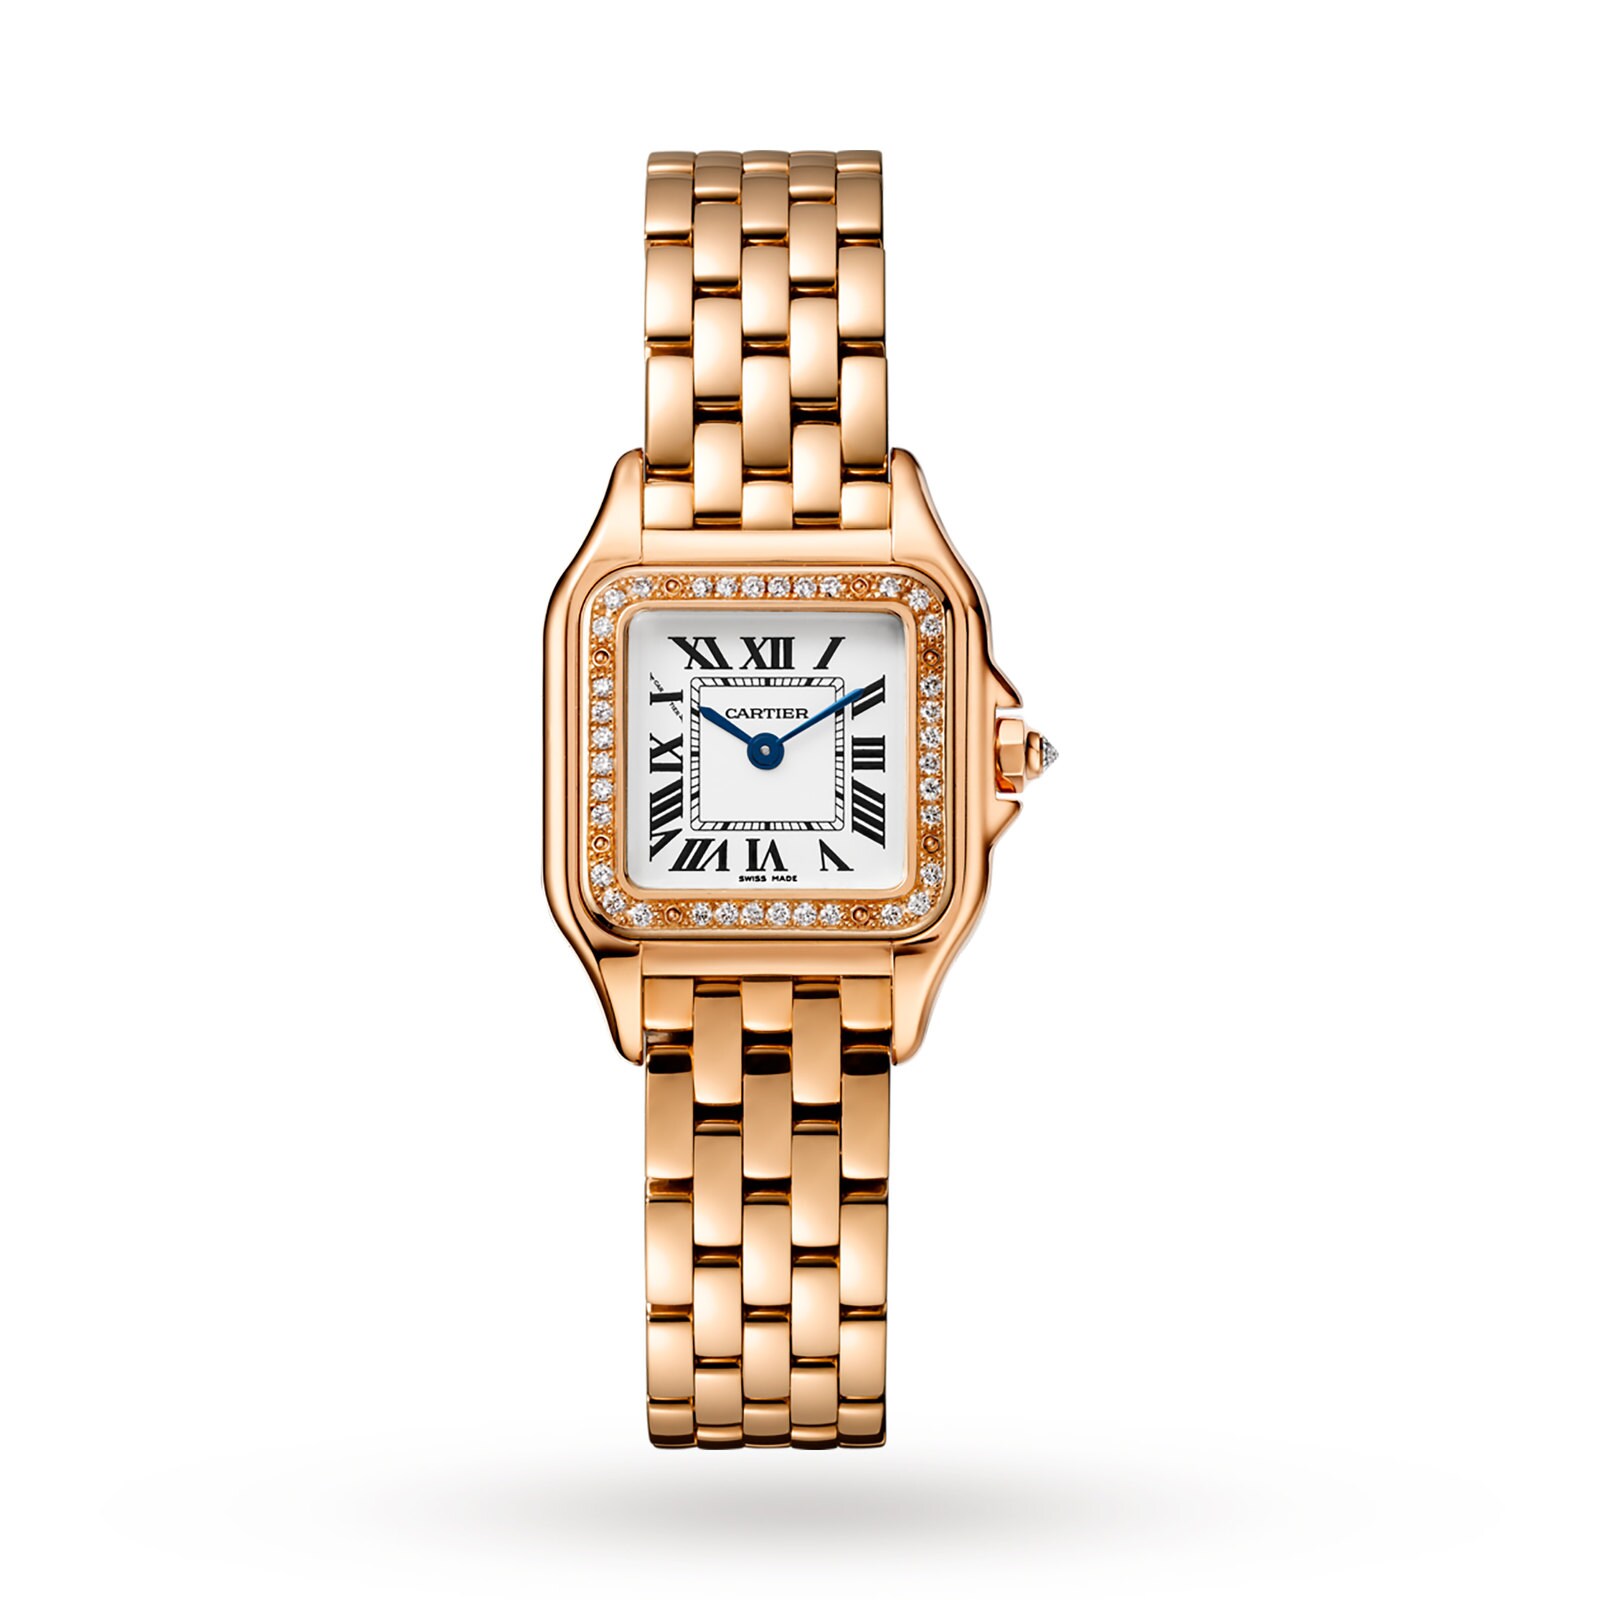 CASIO Unisex Rose Gold Digital Watch D217 Price in India, Full  Specifications & Offers | DTashion.com